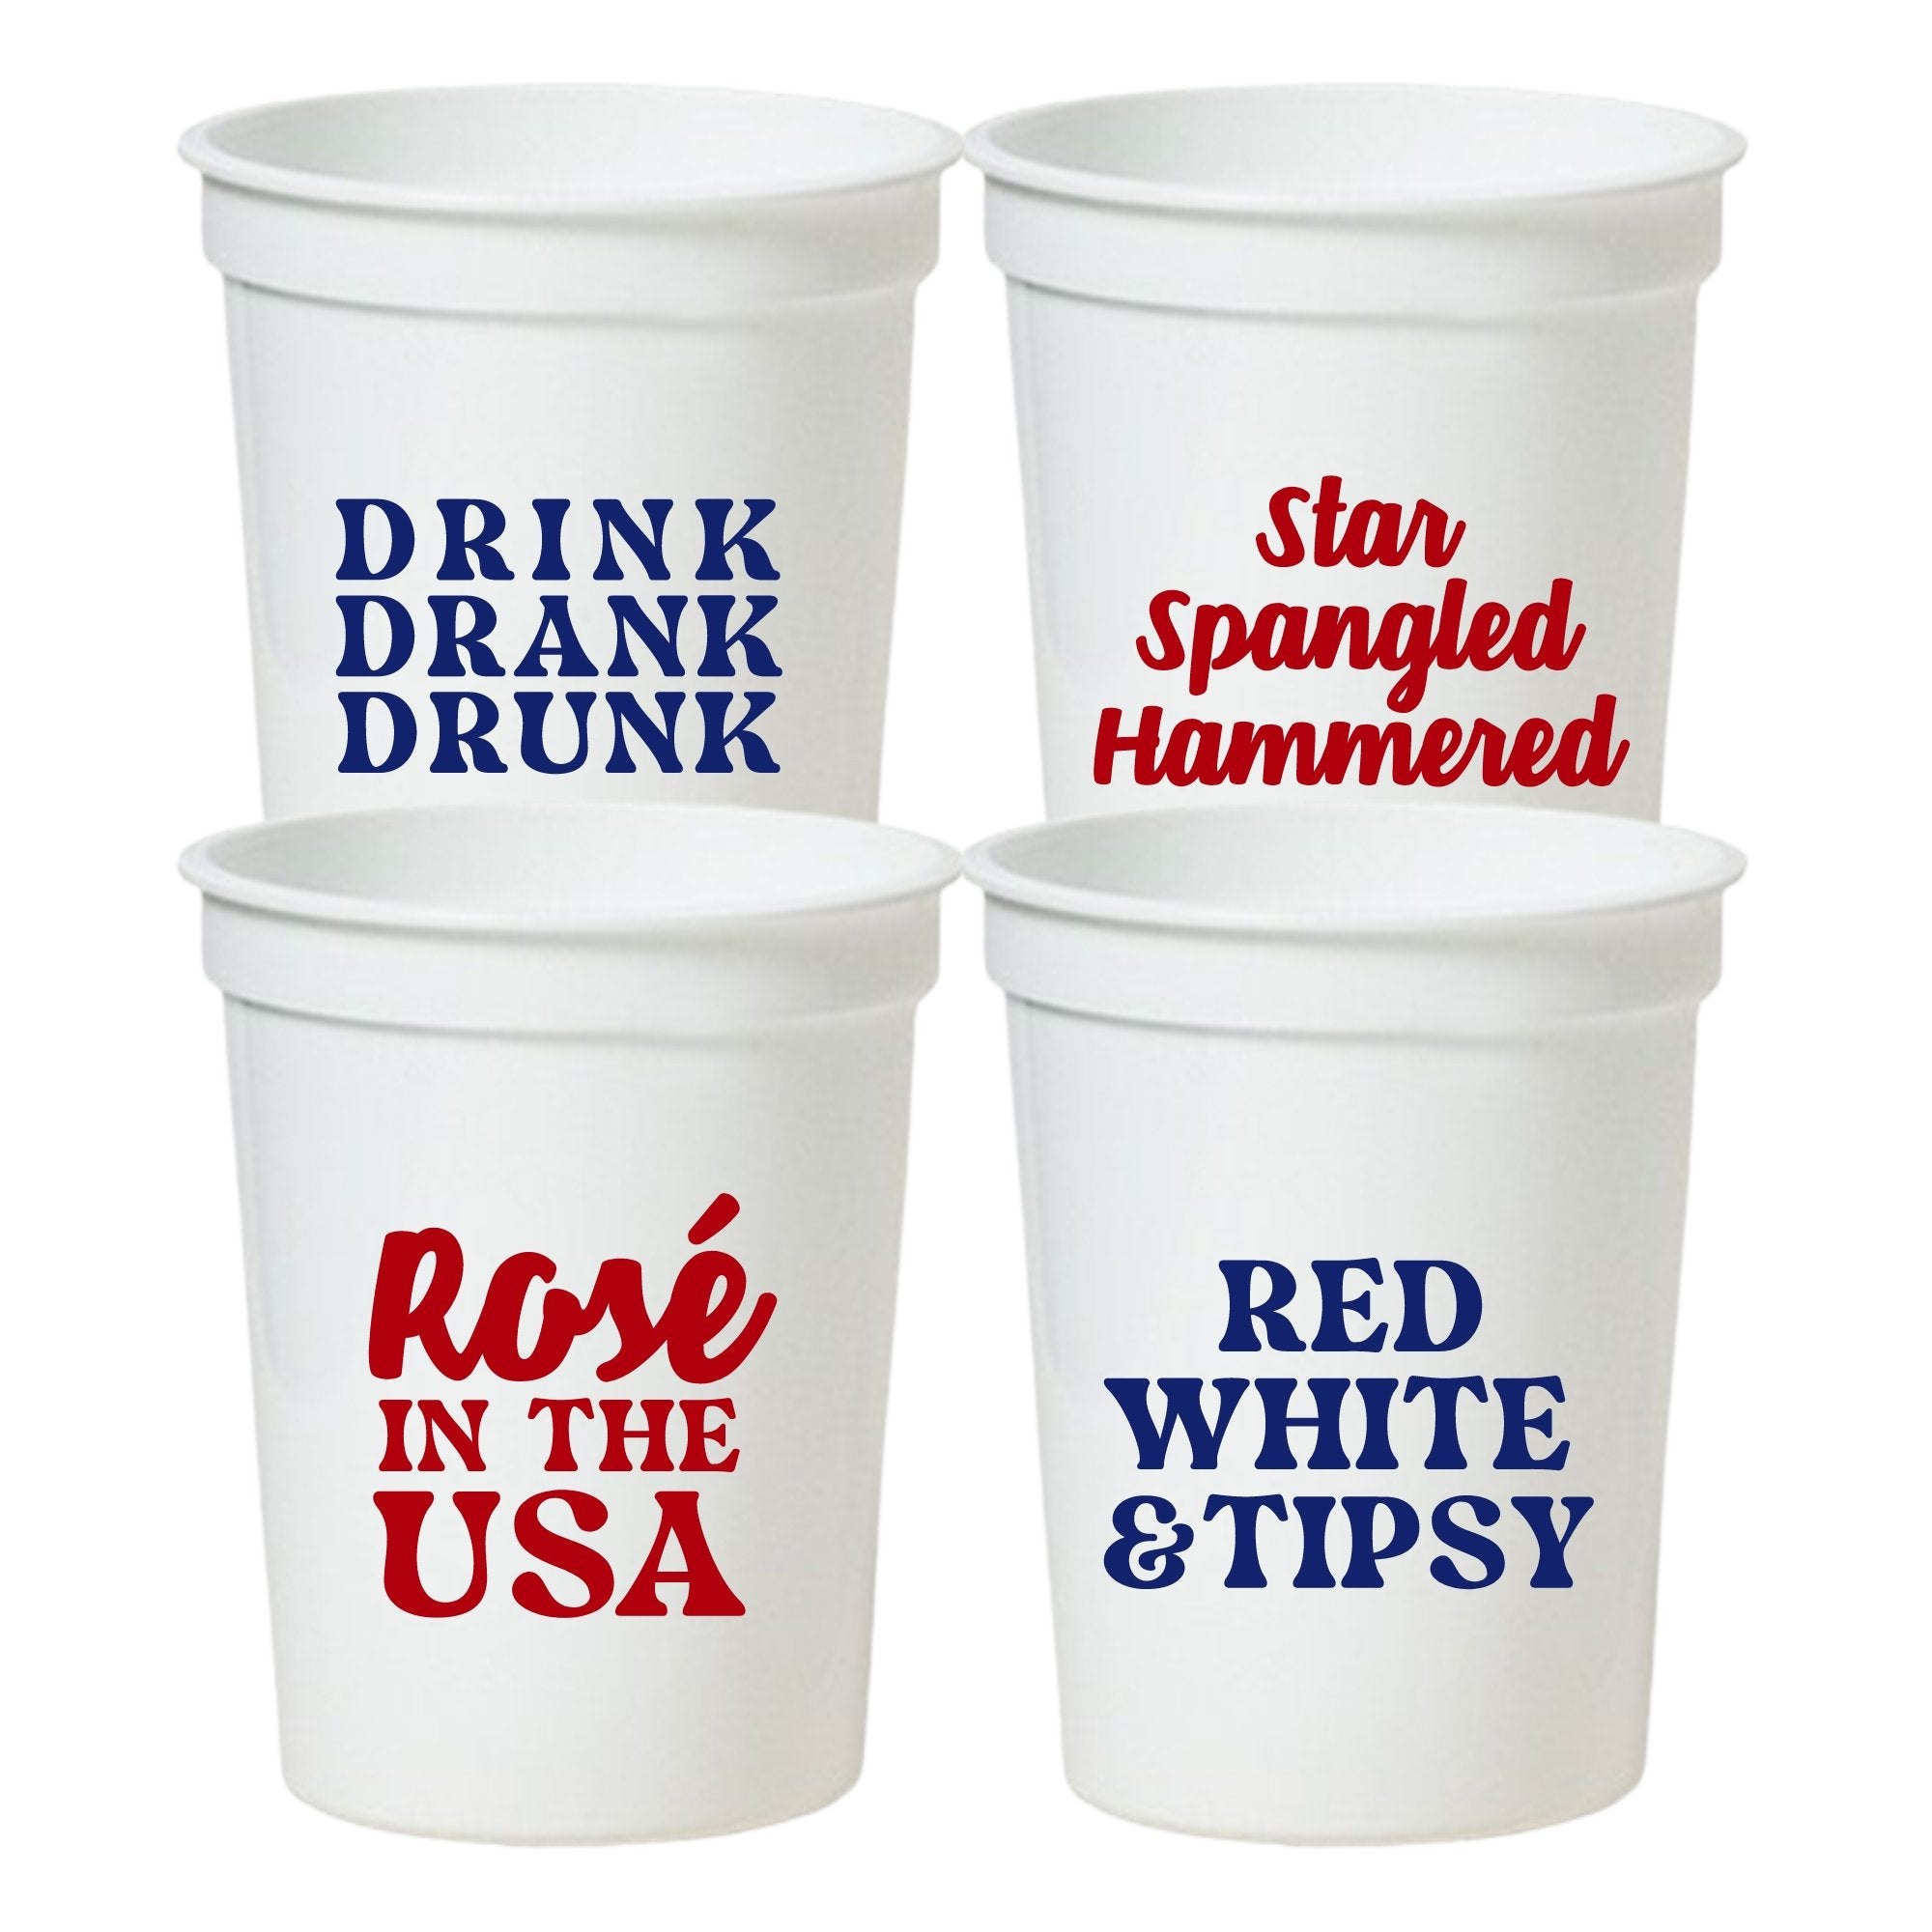 A set of four white-colored stadium cups customized with patriotic drinking phrases